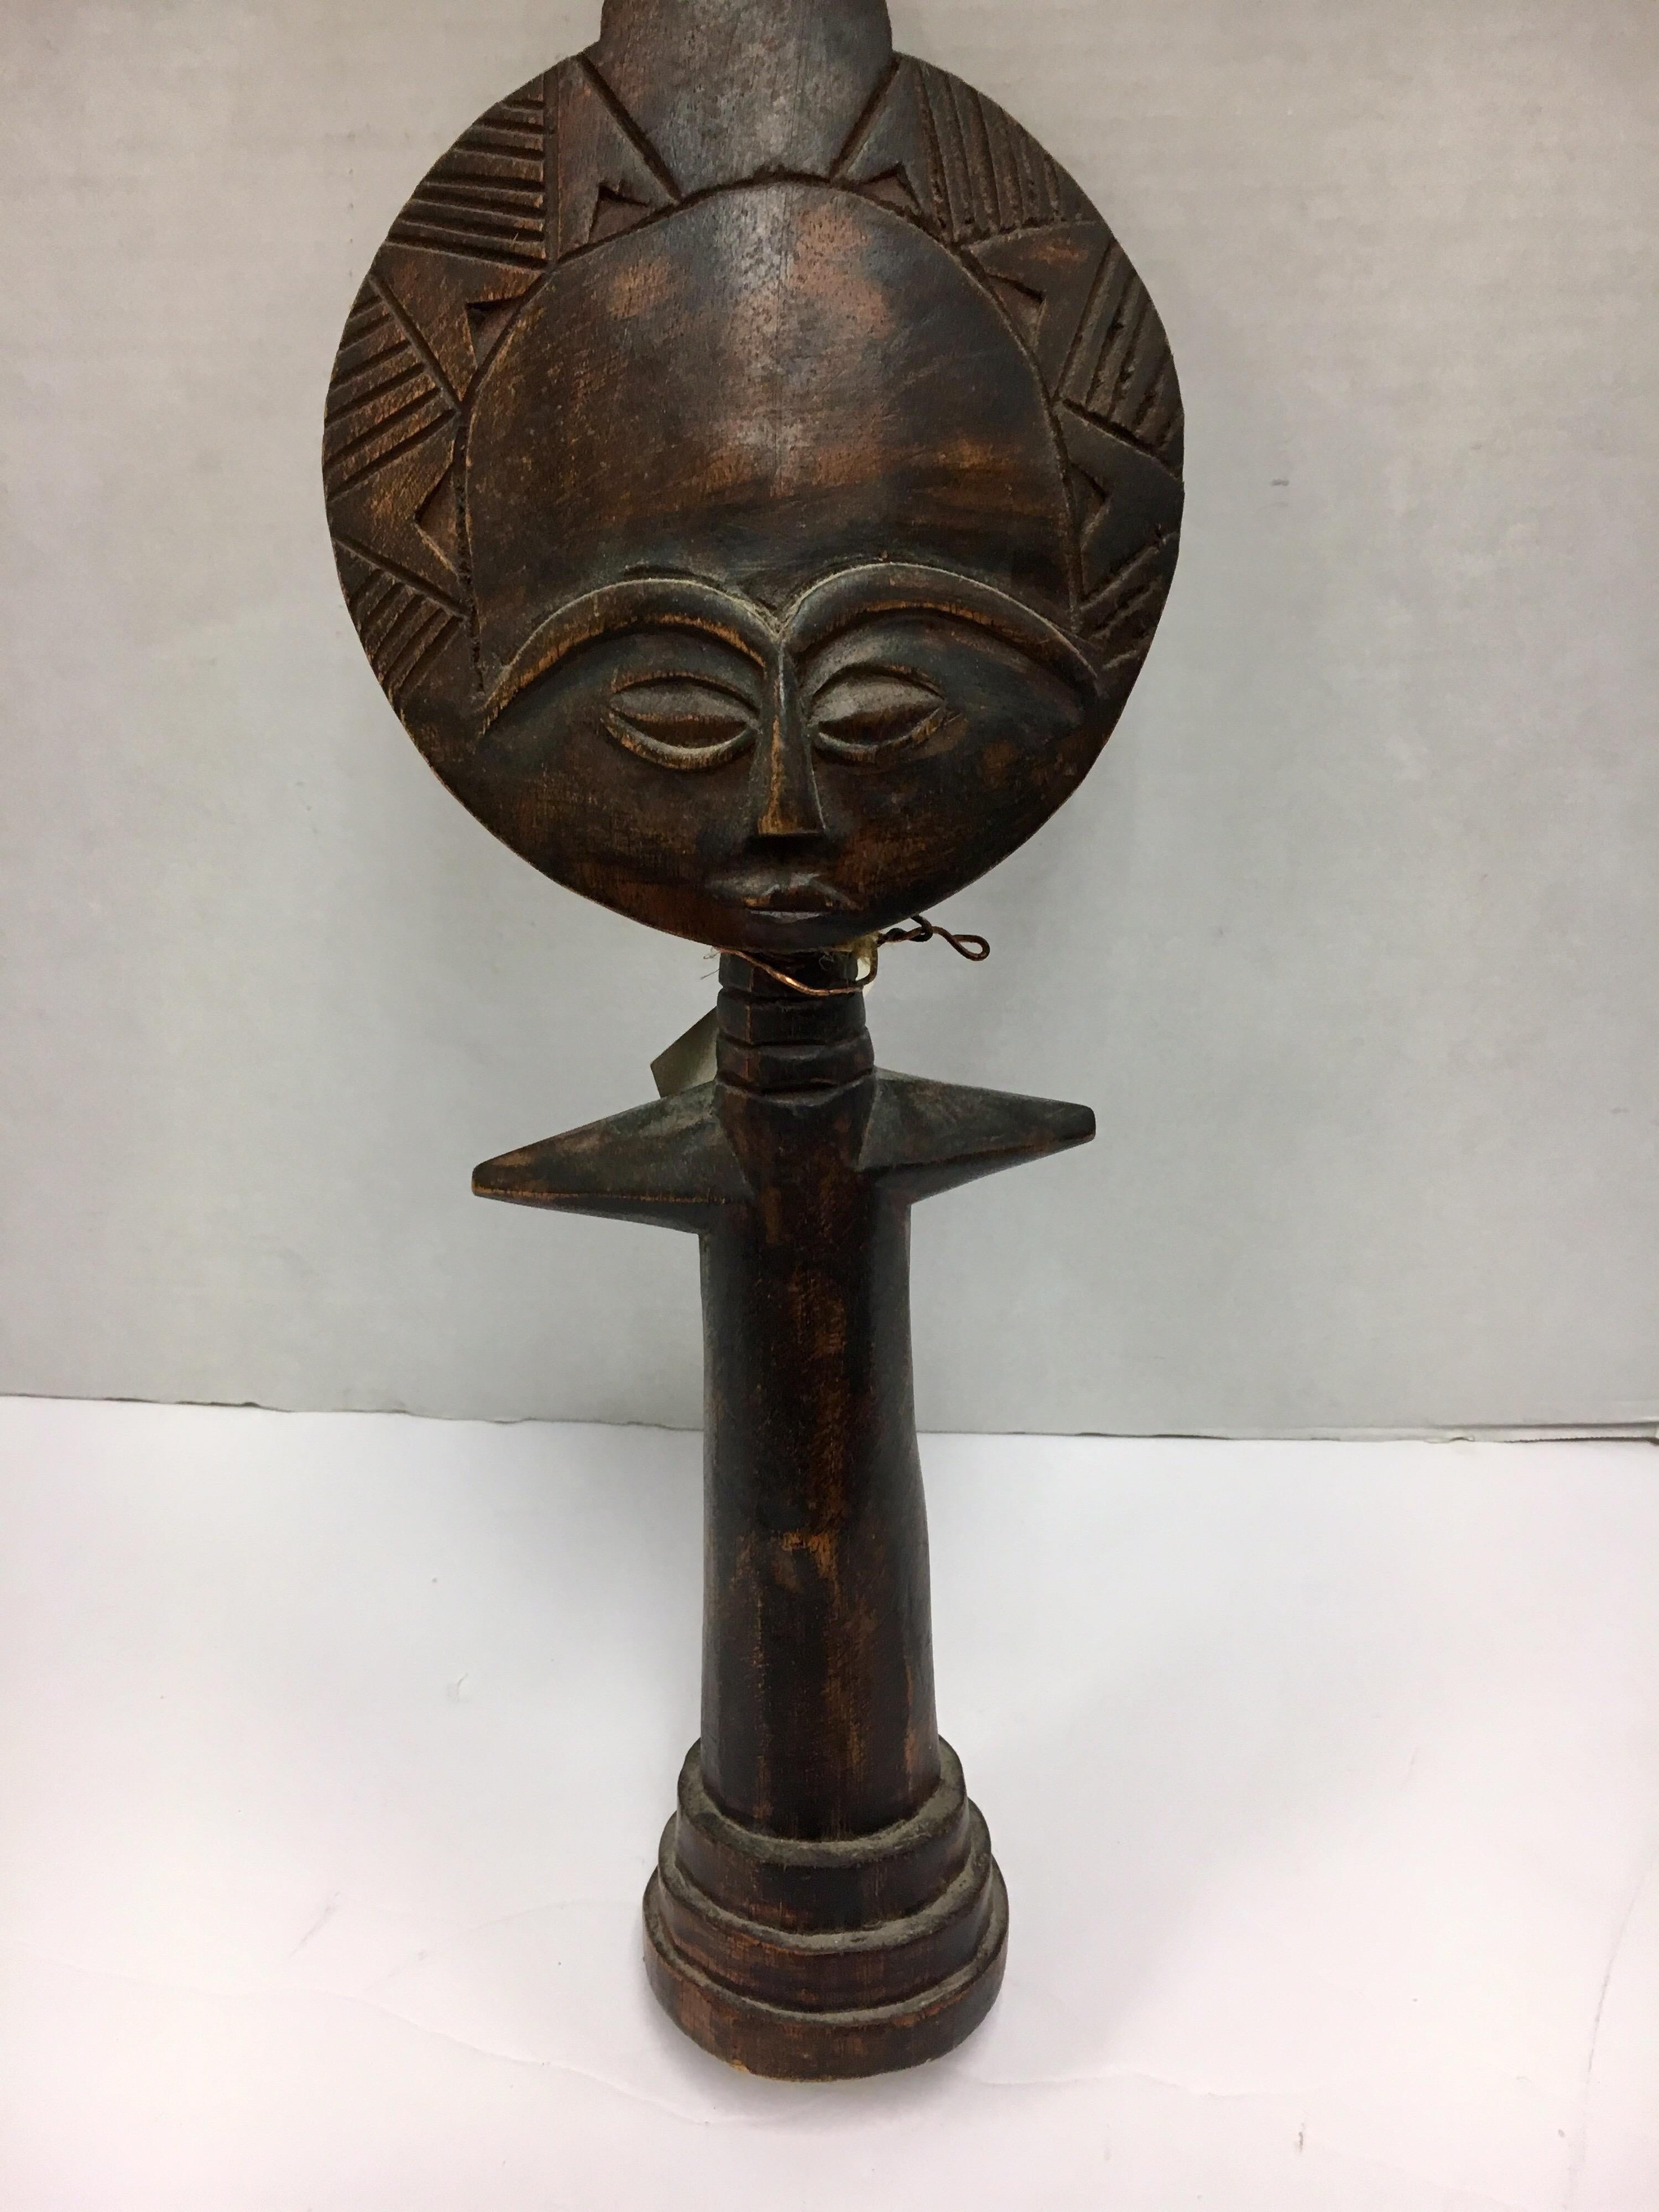 Coveted decorative African hand carved wood mask with graphic elements, circa 1960s
This is a decorative item from the 1960s, it was made for export, it is not an antique tribal mask.
It was made by a master carver from a single piece of wood and